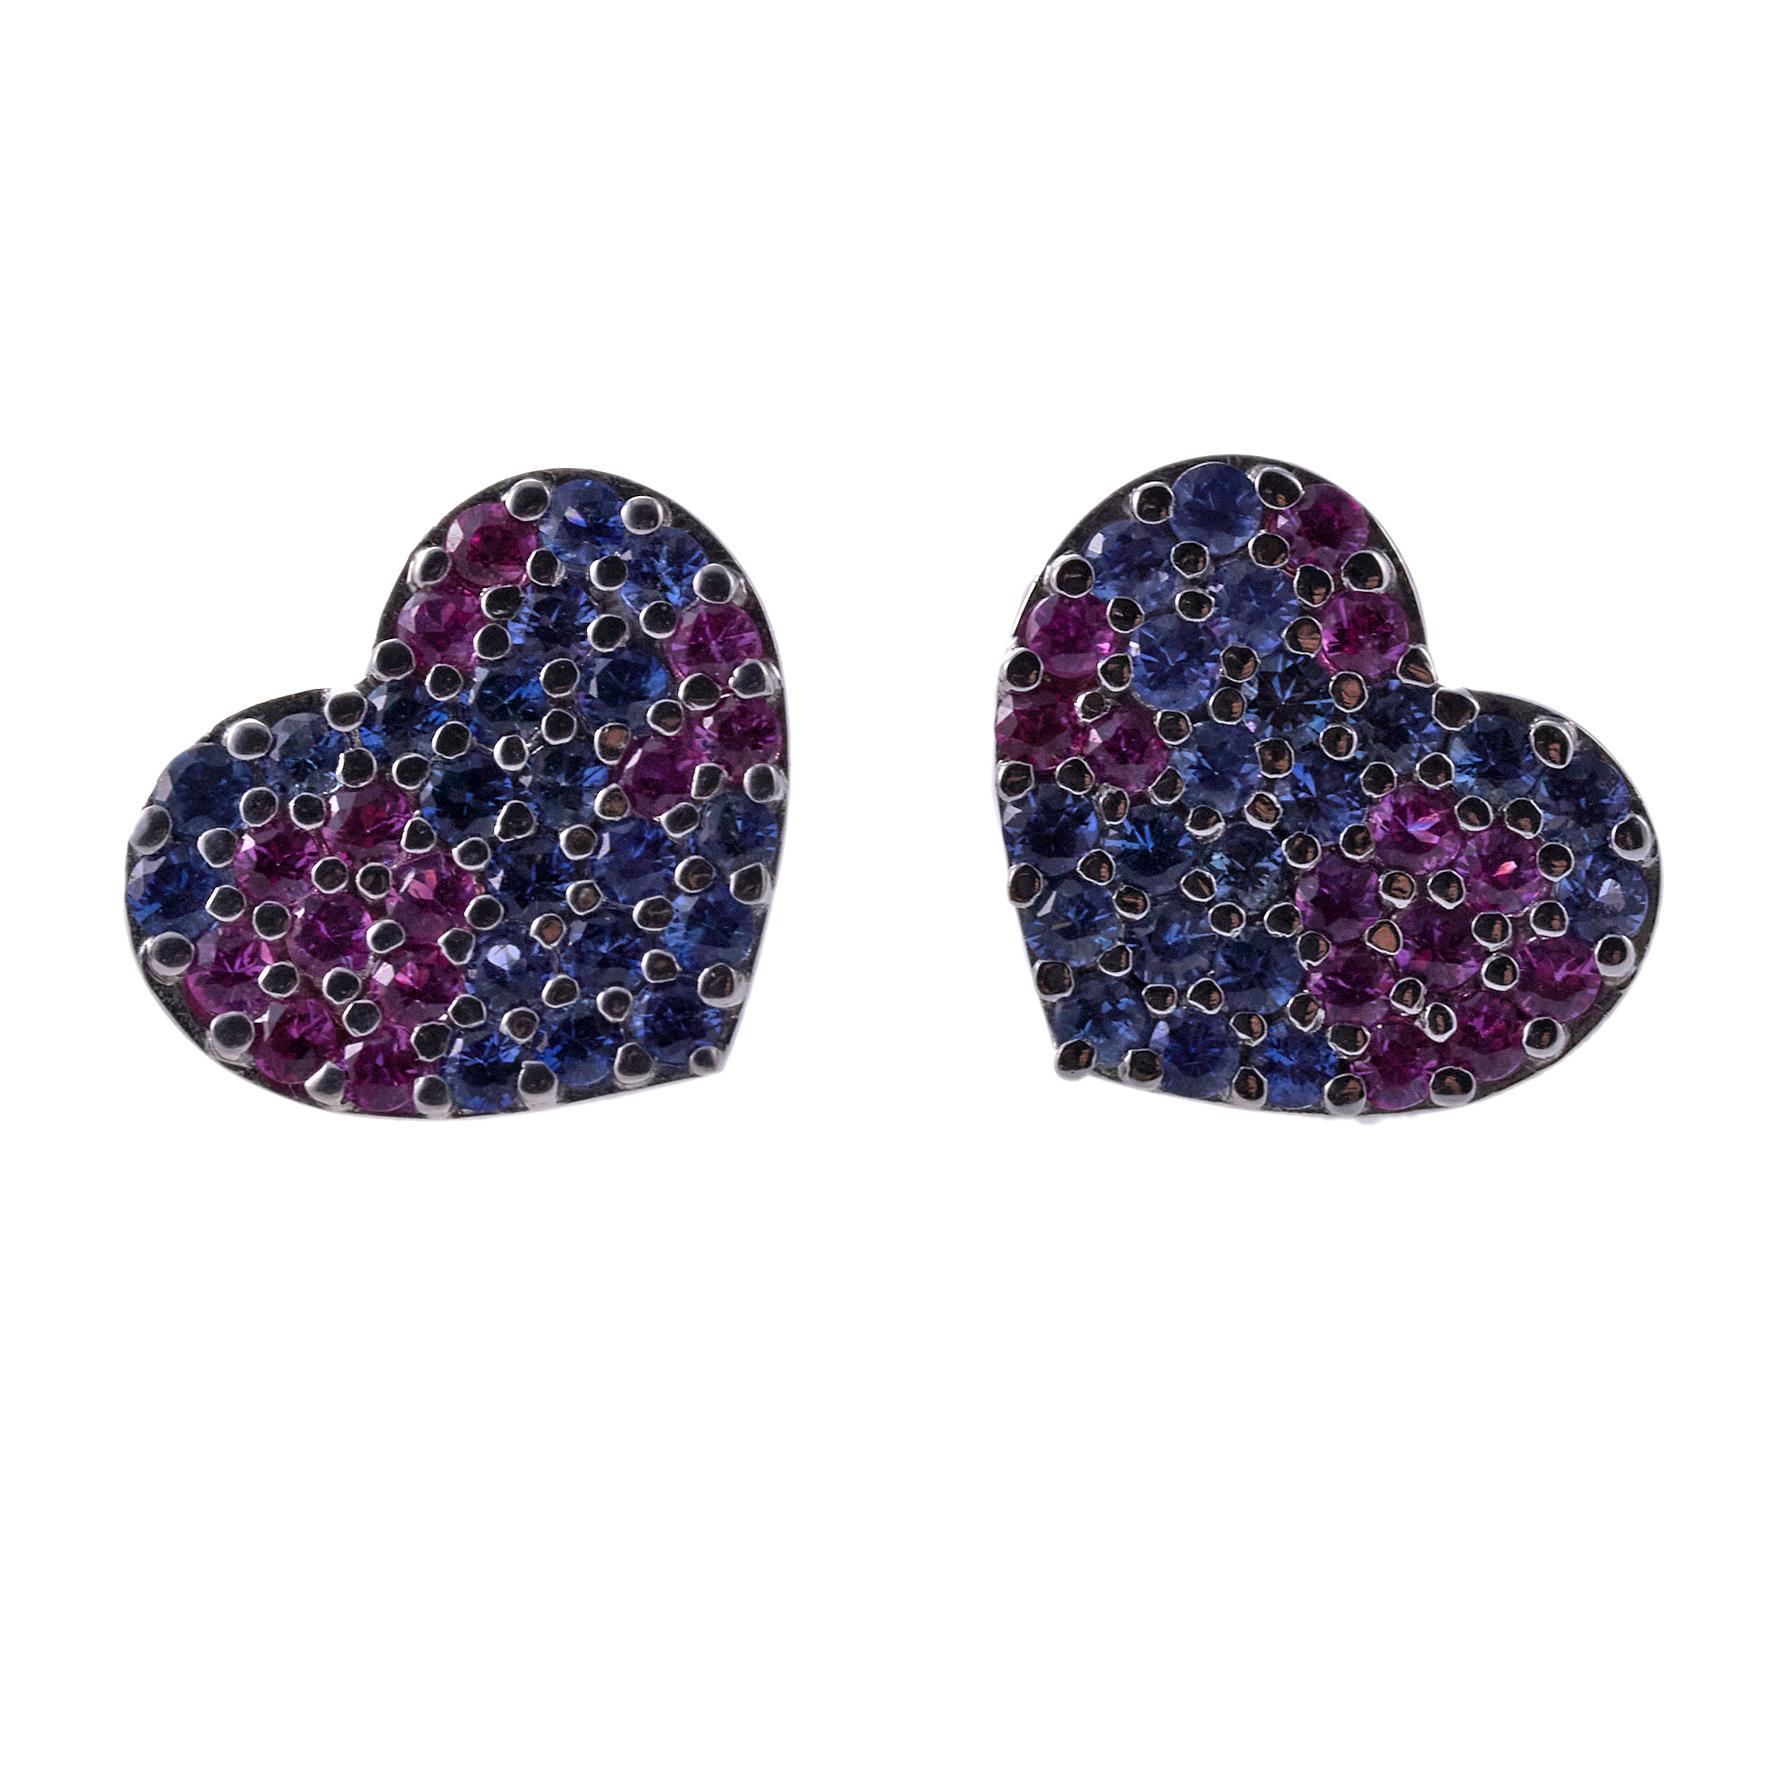 Roberto Coin pink and blue sapphire heart stud earrings. Earrings measure 15mm x 15mm. Marked: RC,750, 1226VI. Weight is 5.5 grams. New store sample. Retail Value $3080. Tags removed for photographing.